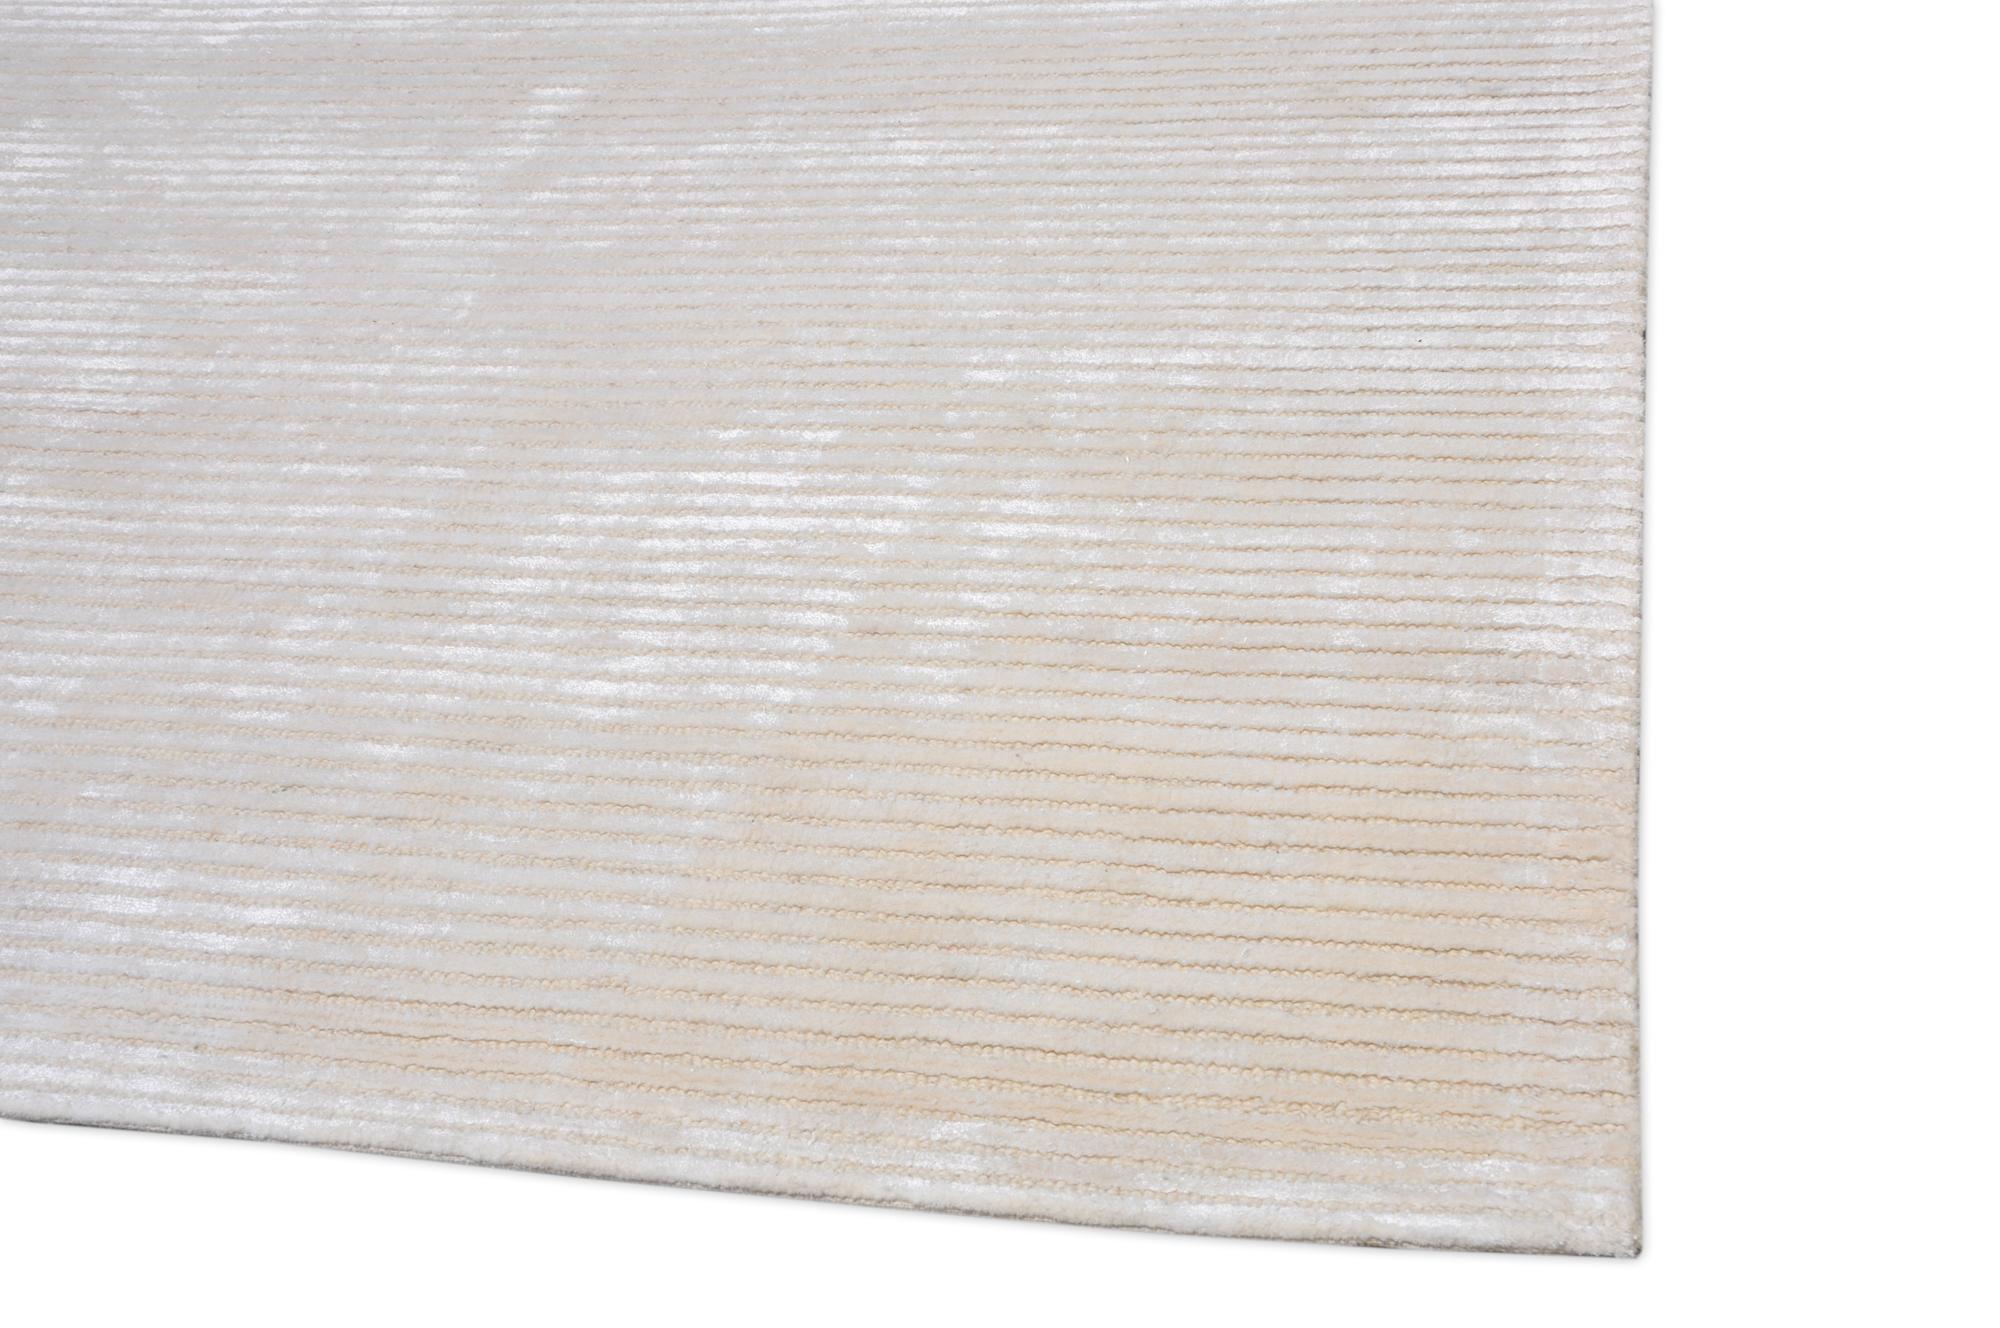 Pasargad Home Edgy Collection Hand-Tufted Bamboo Silk & Wool Area Rug, 7' 9" X 9' 9", Beige - image 5 of 6